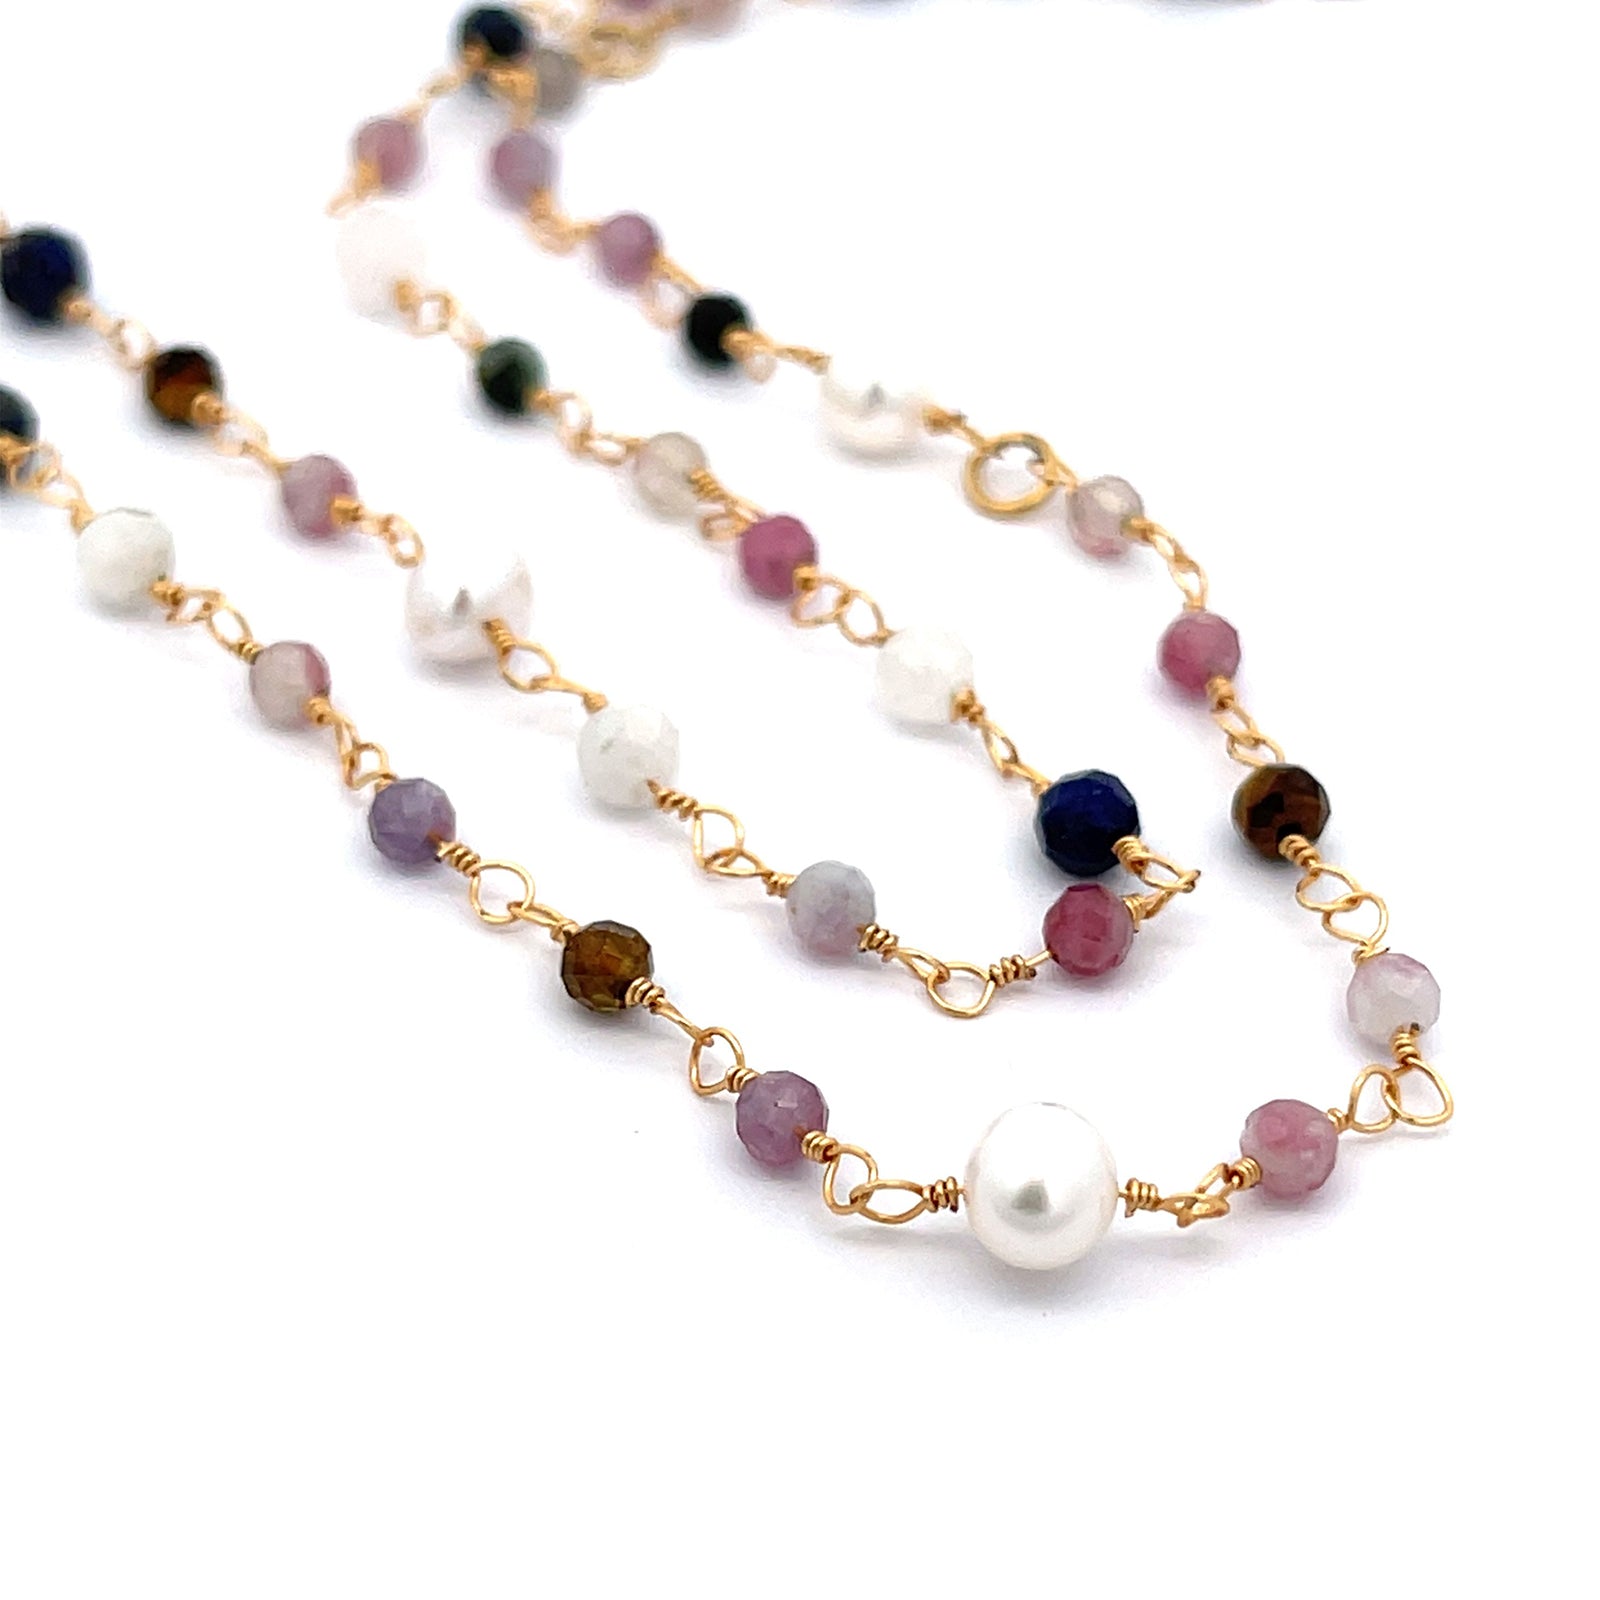 “Chiyo” Fresh Water Pearl and Mix Stones Necklace